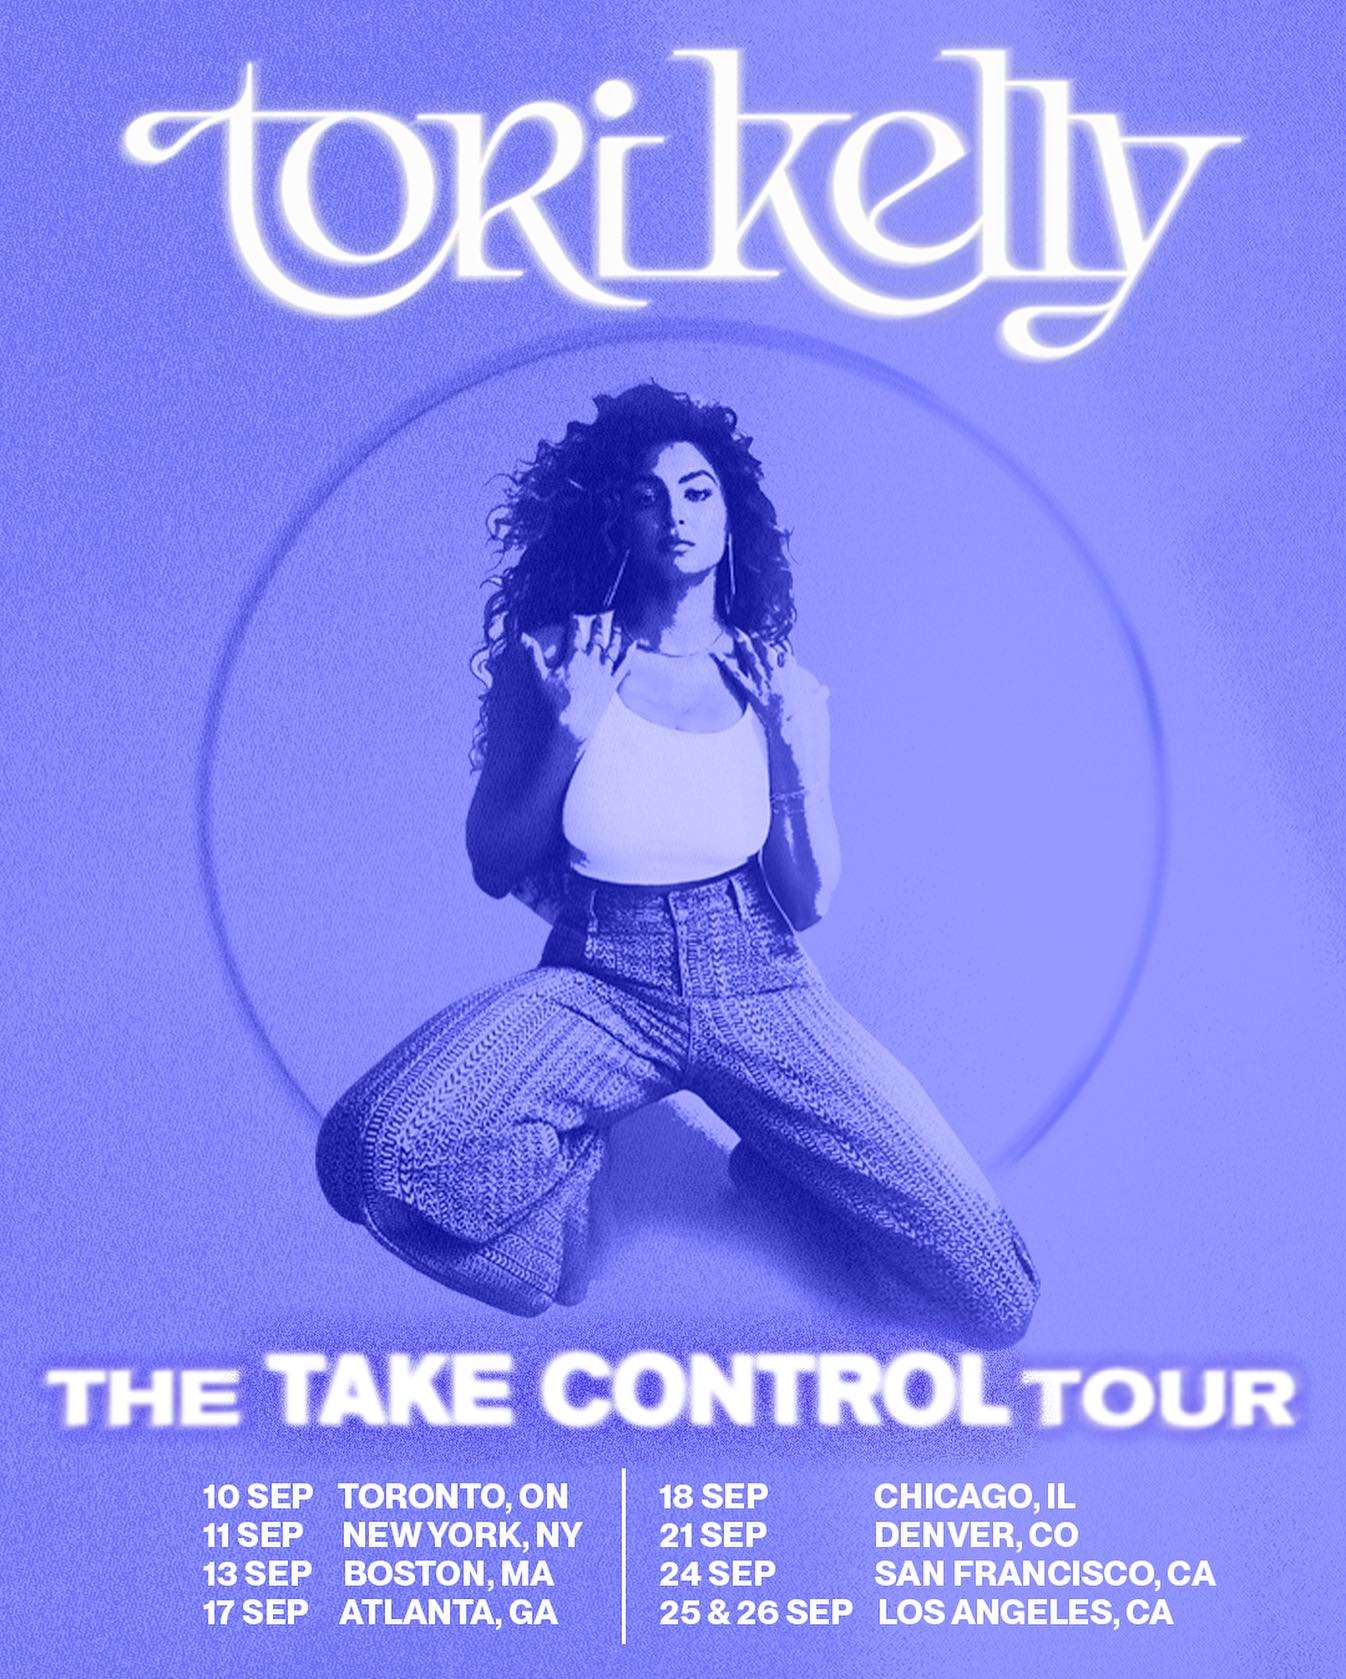 Tori Kelly’s “Take Control” Tour 2023 – Presale Code, Venue Details, Tickets, and Tour Dates Revealed